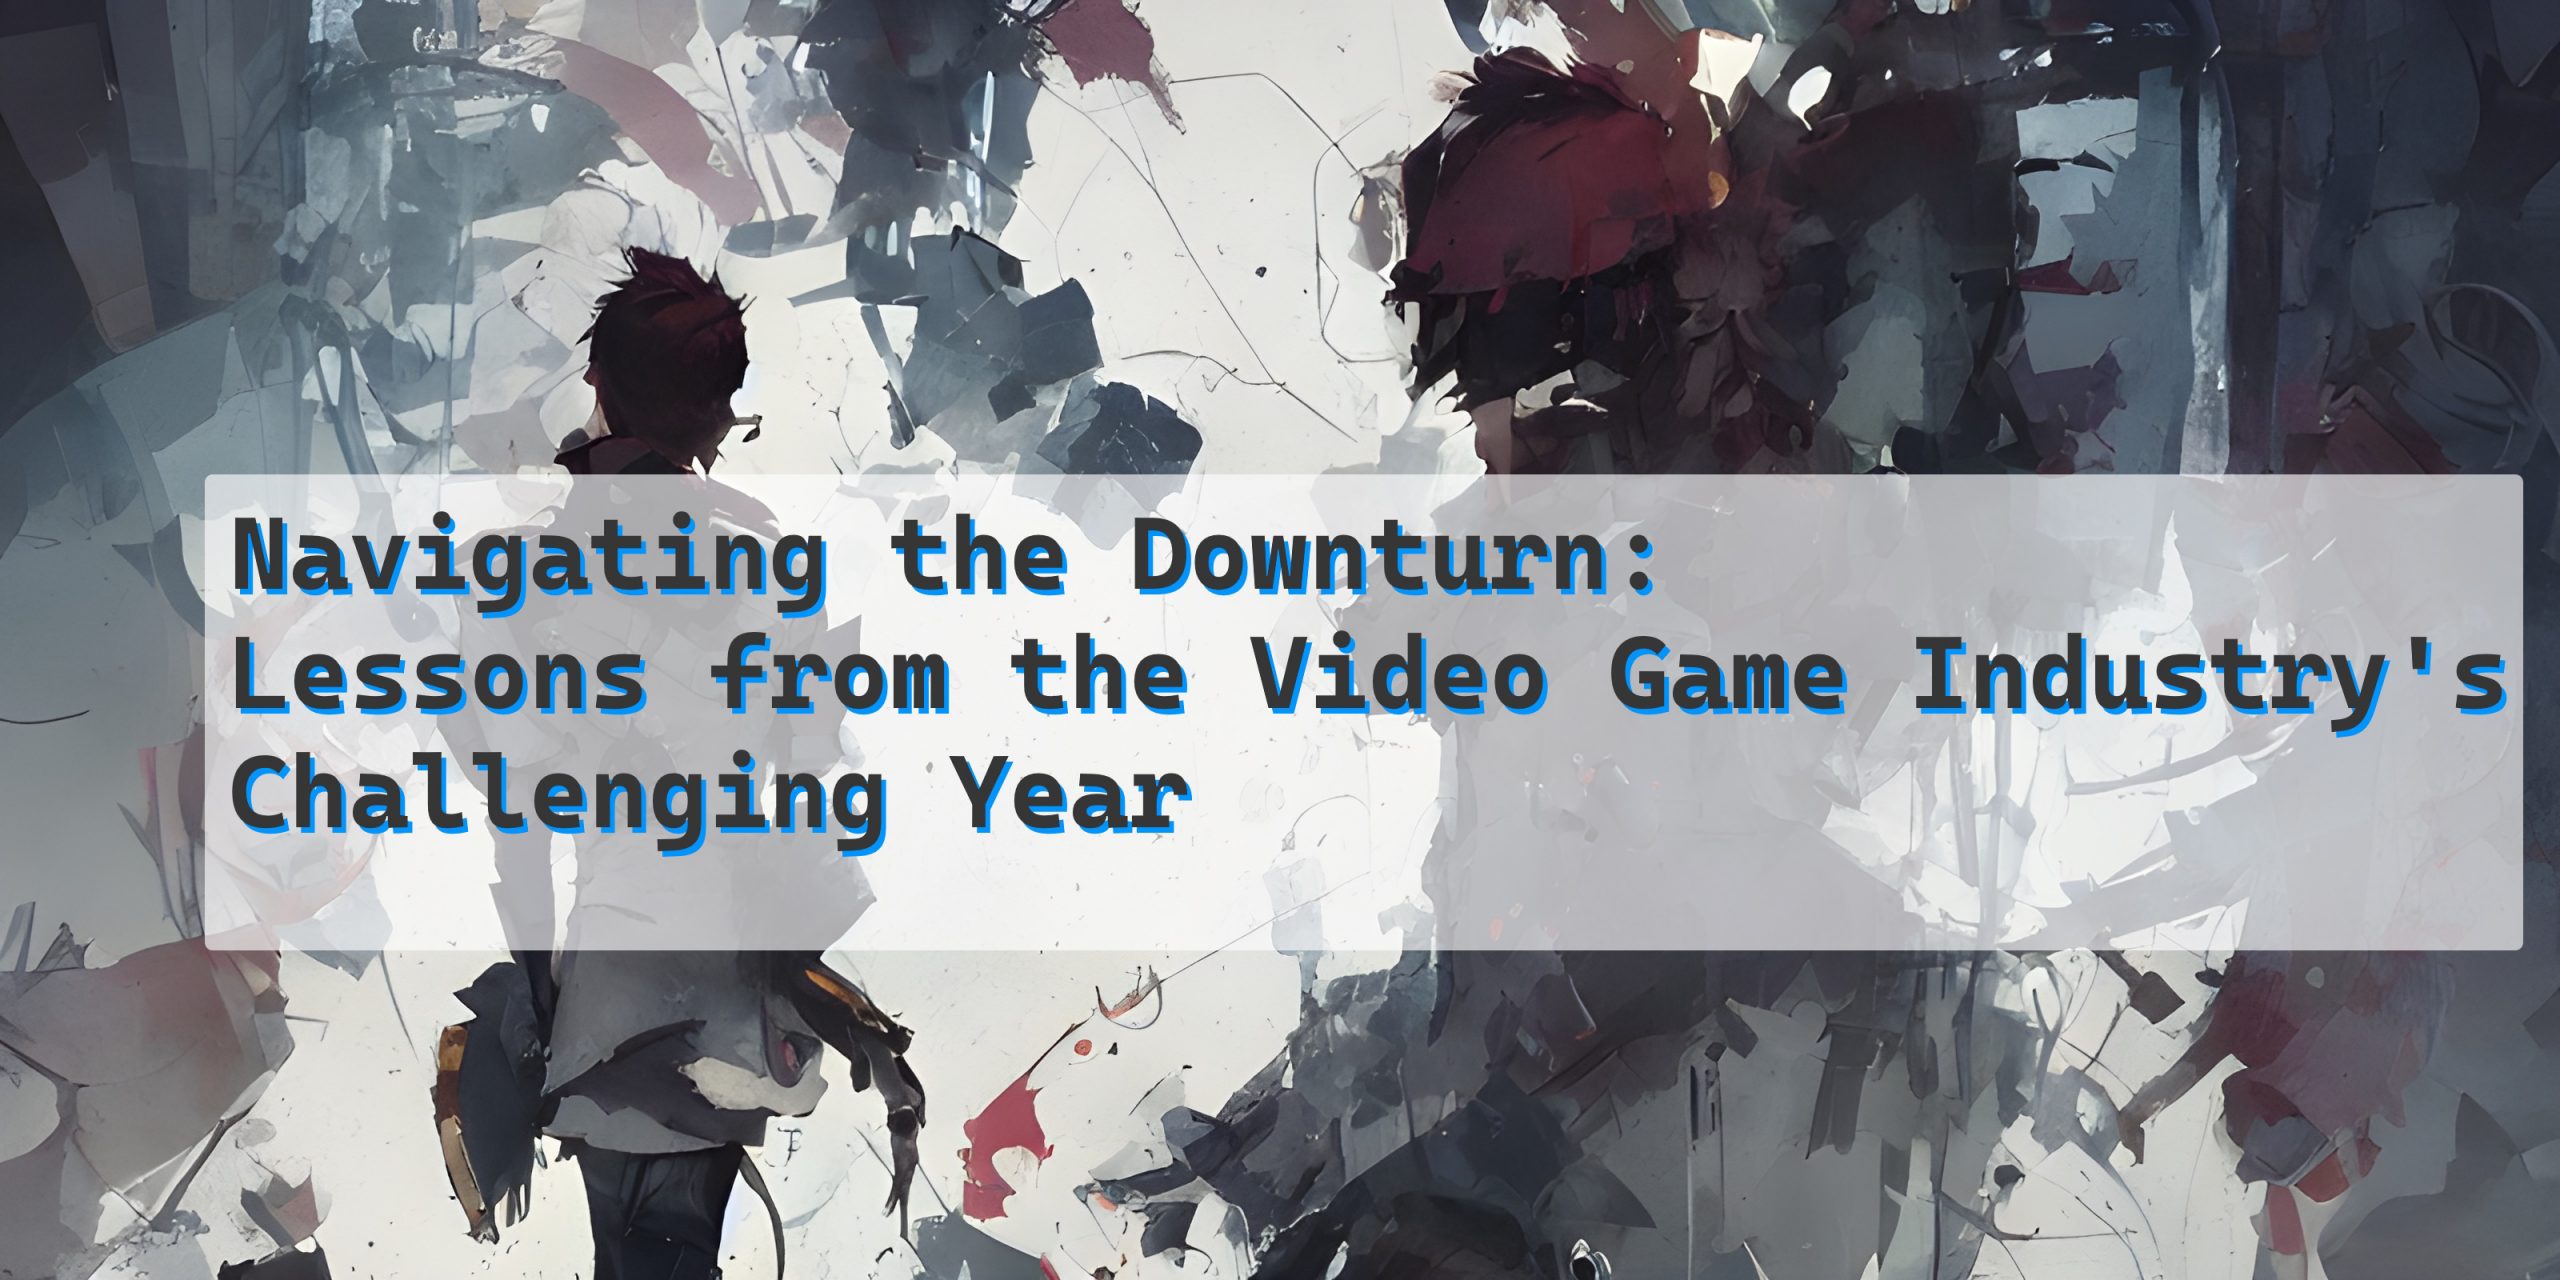 Navigating the Downturn: Lessons from the Video Game Industry’s Challenging Year